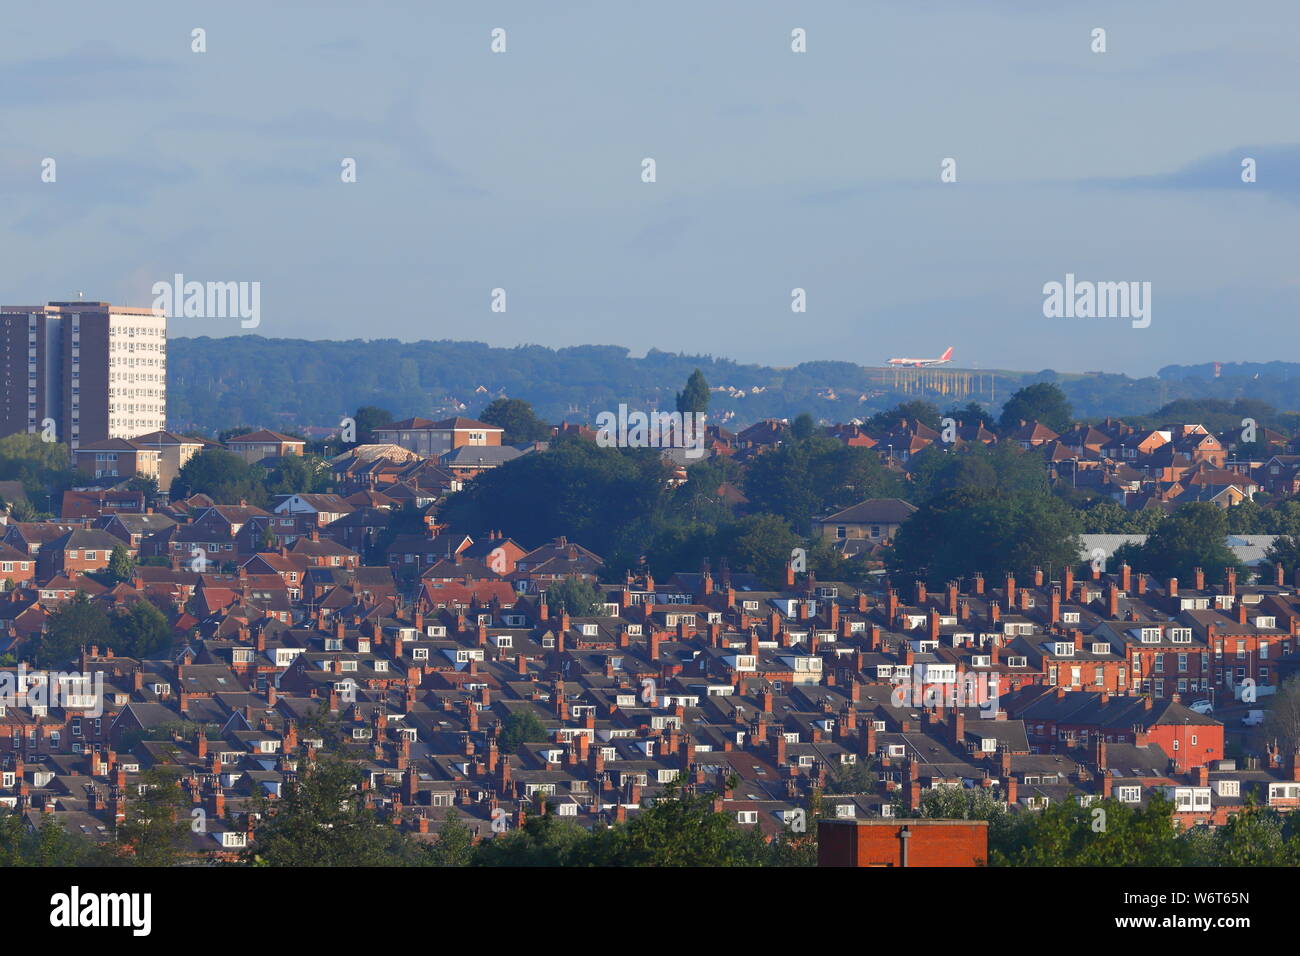 The view of Leeds Bradford Airport runway with a Jet 2 aircraft about to depart. Taken from a 125 foot work platform in Armley which is 5 mile away. Stock Photo